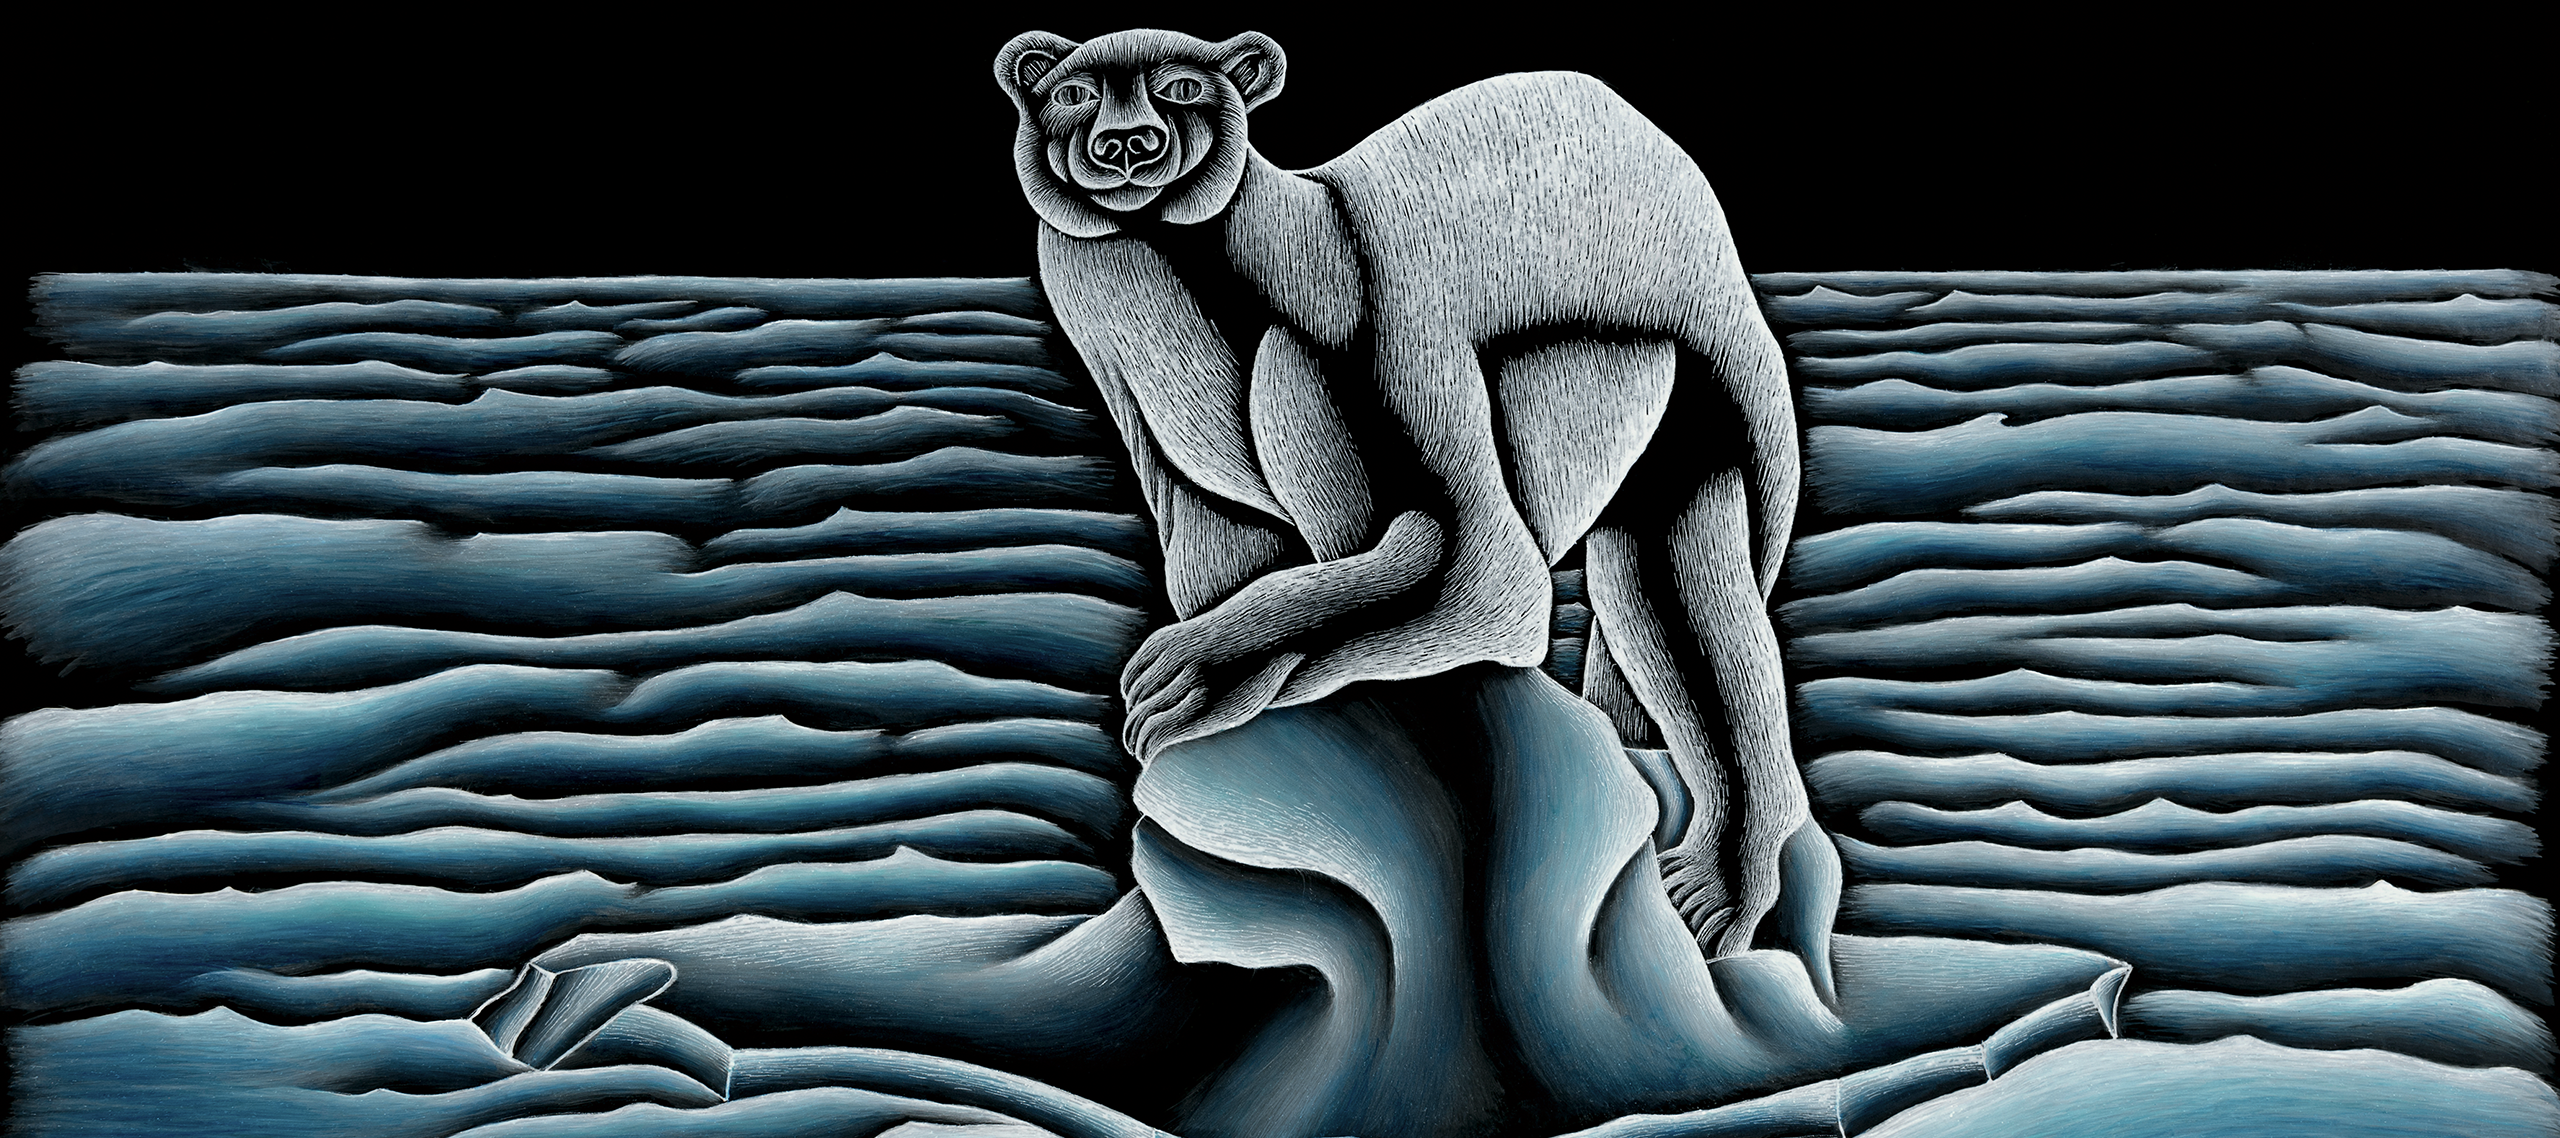 Painting on black glass shows a polar bear standing on a small block of ice in a choppy ocean and staring out at viewer.